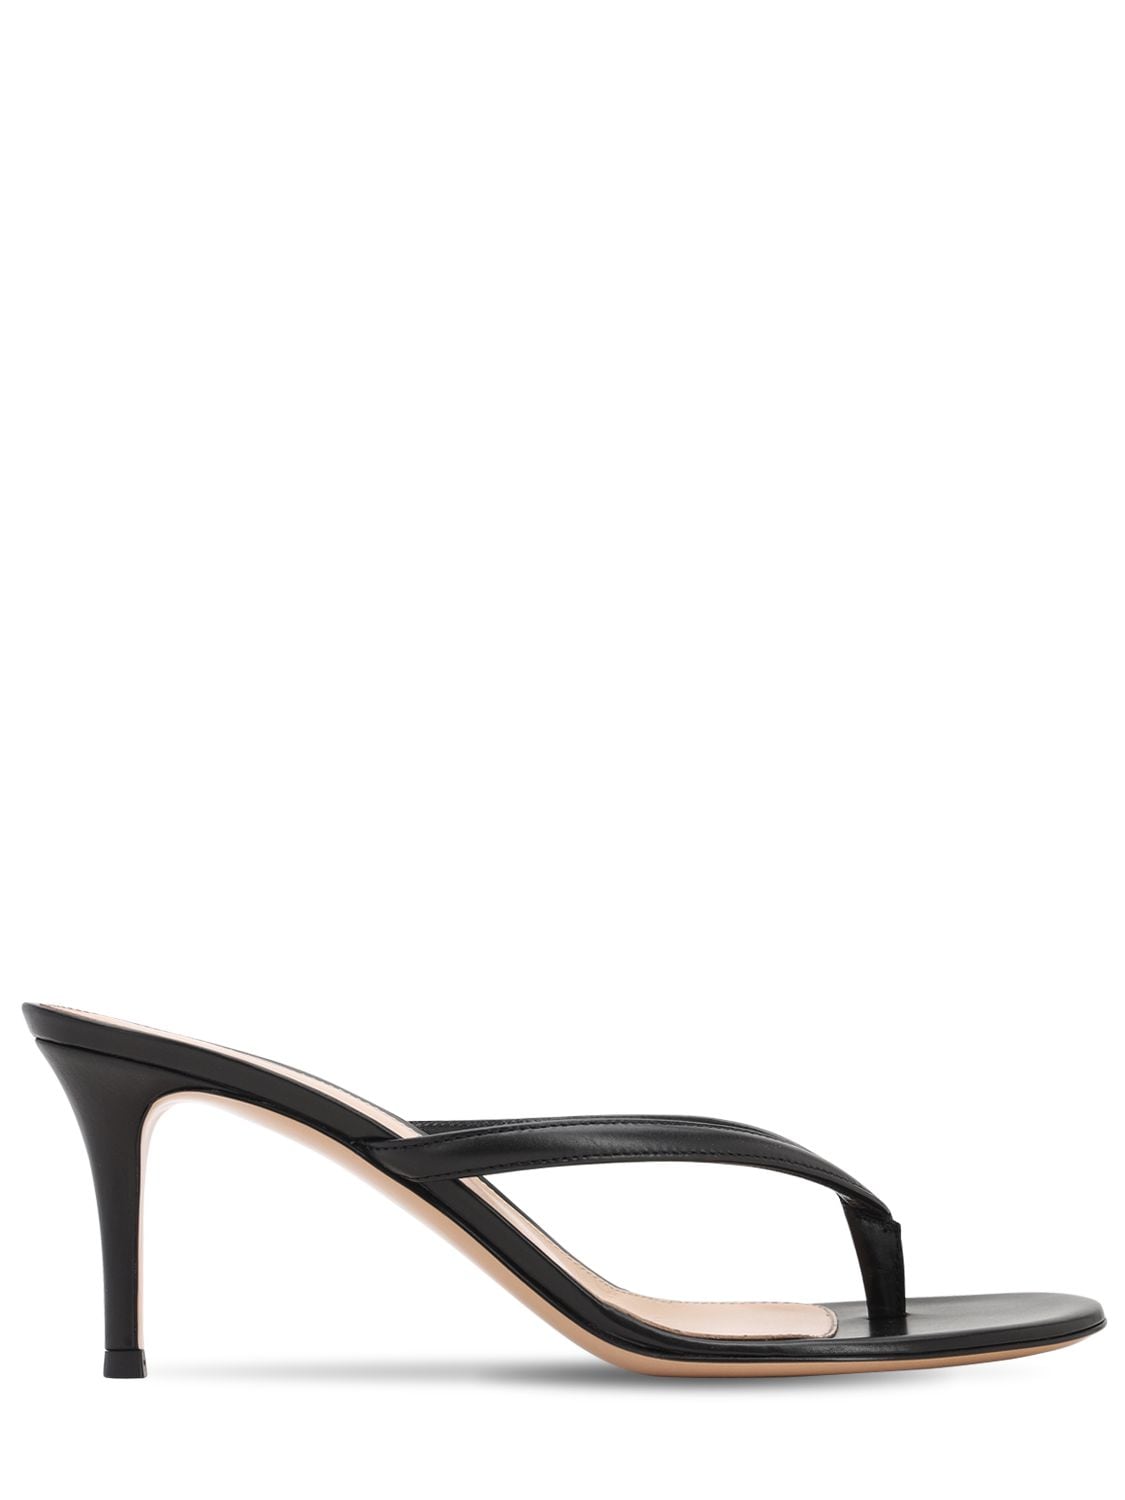 GIANVITO ROSSI 70mm Leather Thong Sandals